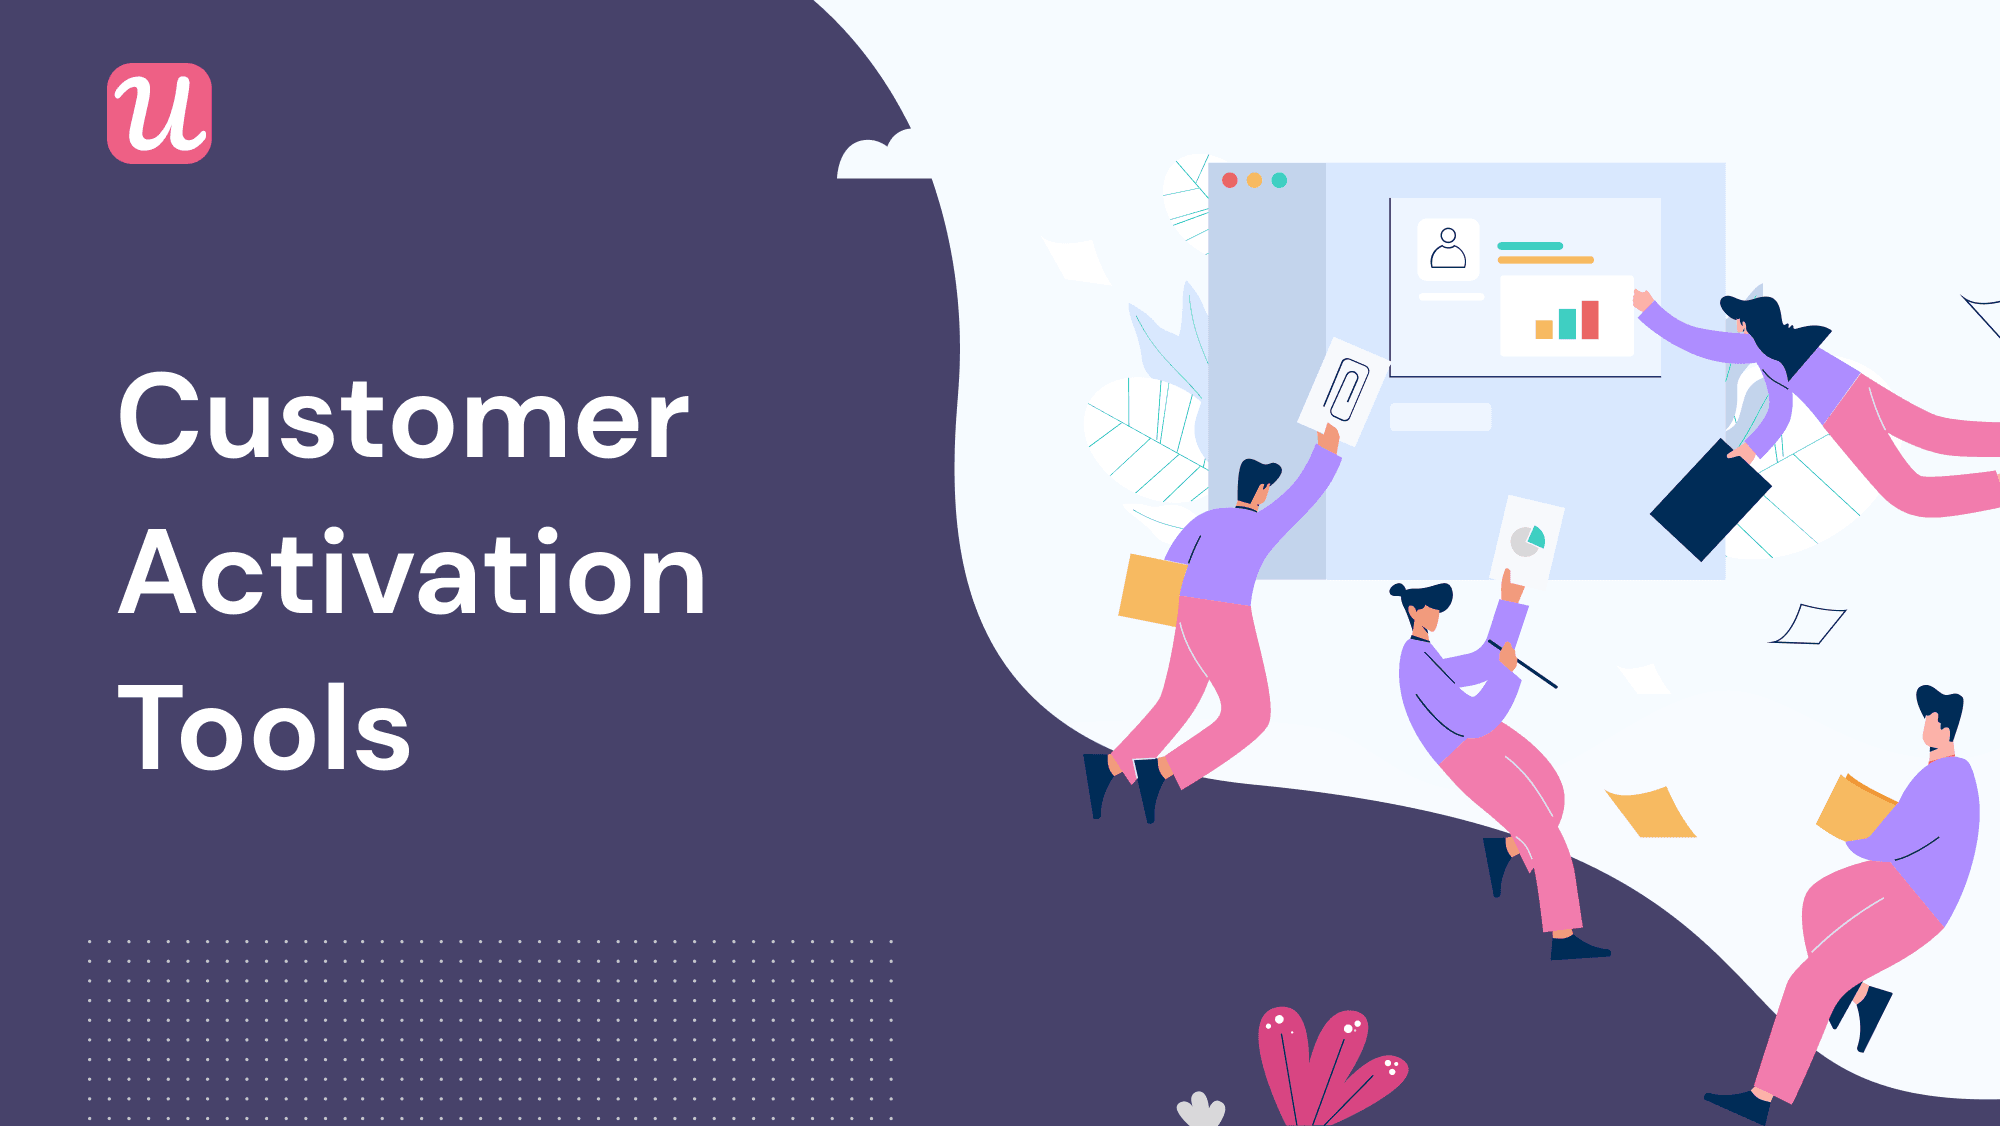 What are the Best Customer Activation Tools for SaaS?